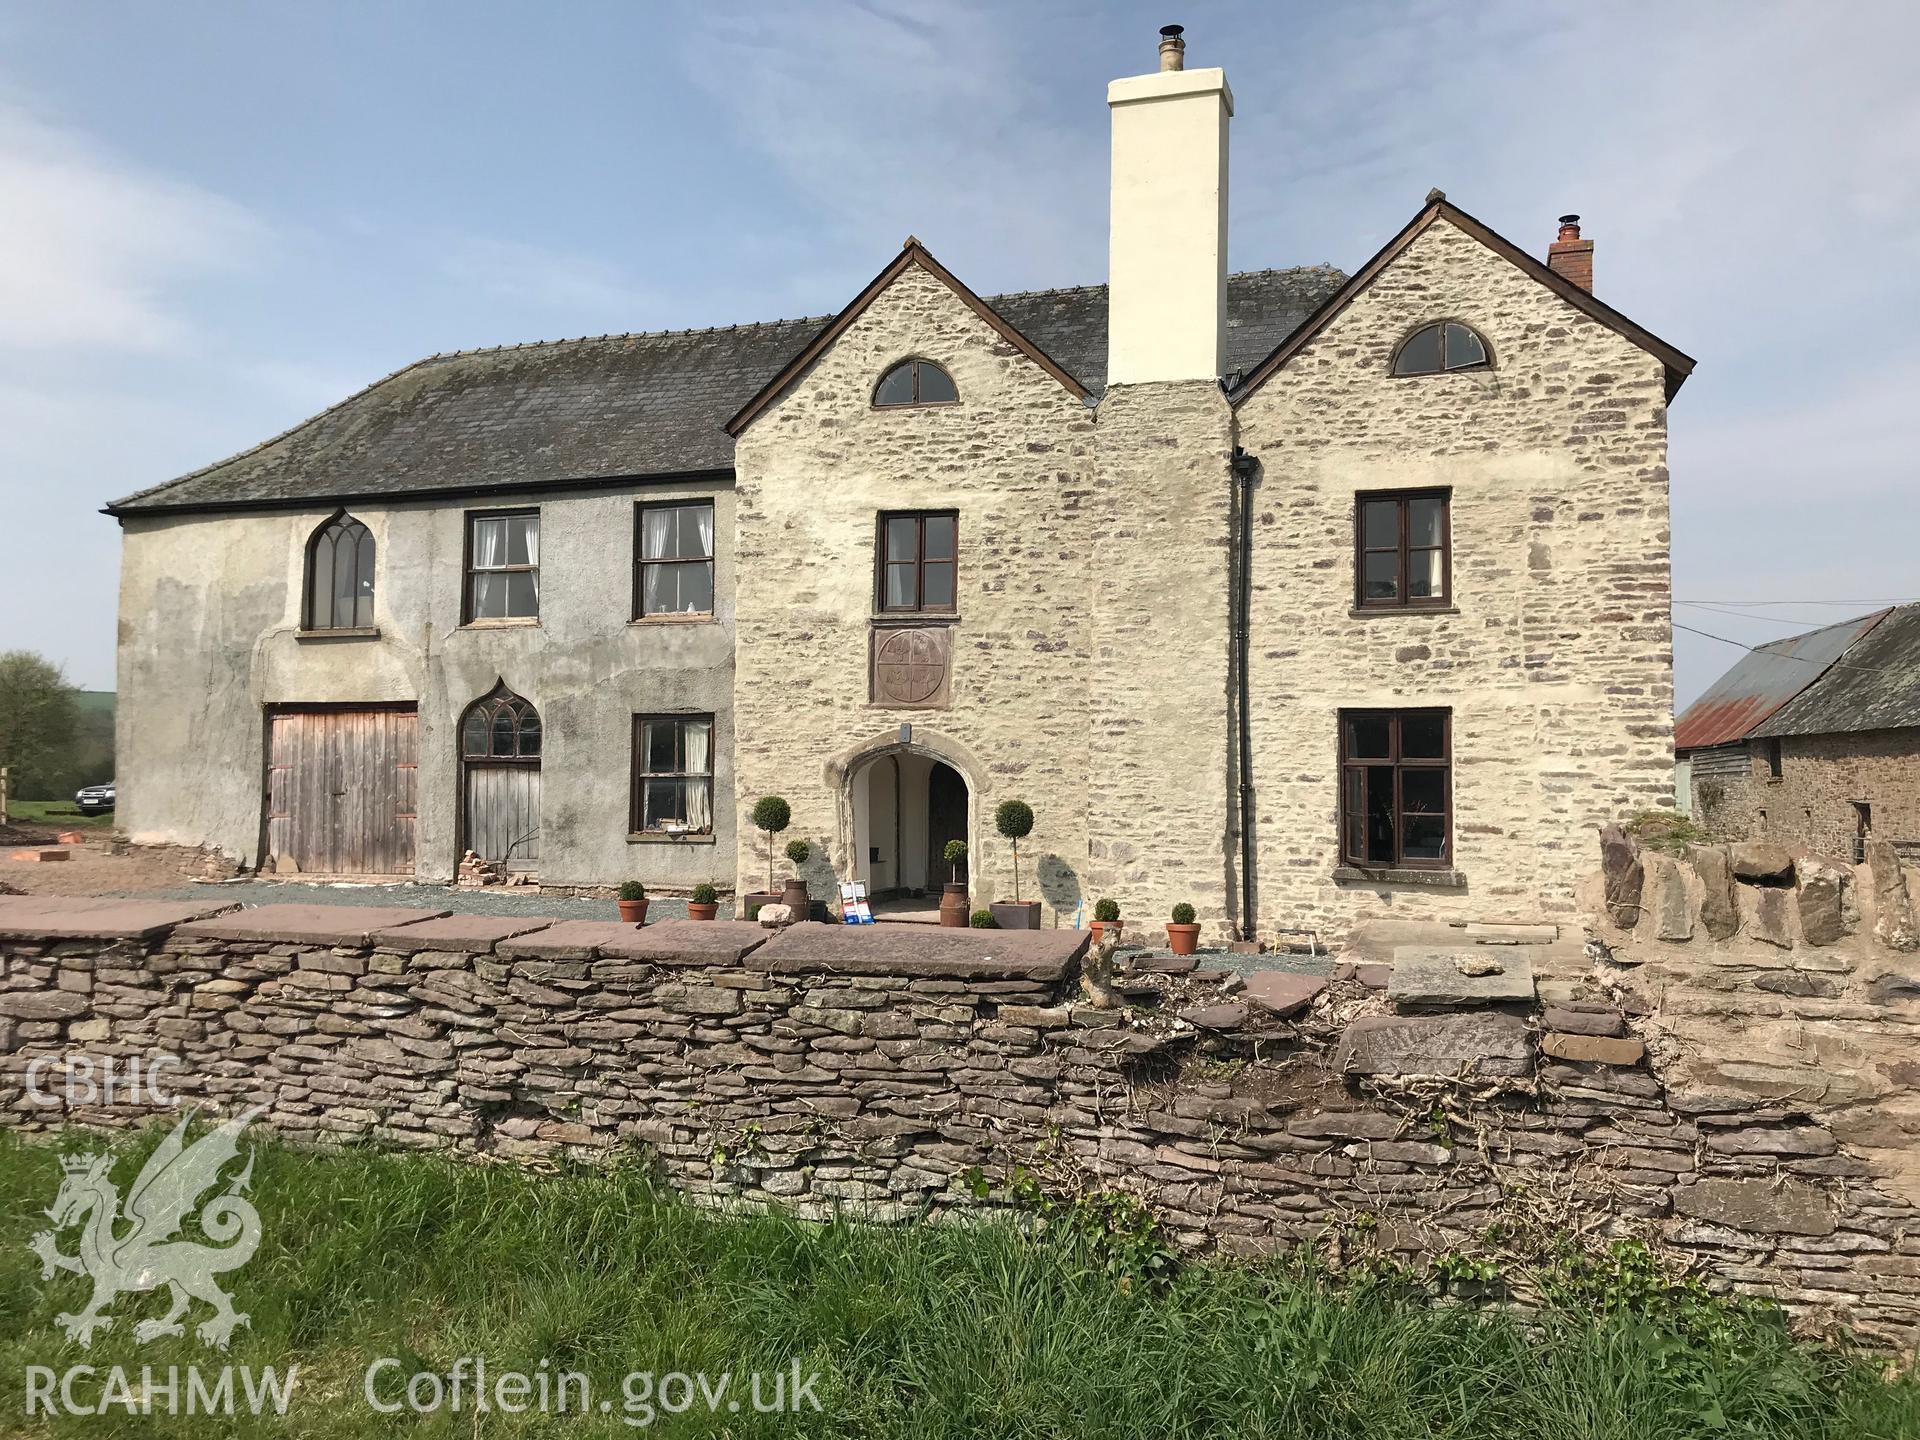 Digital colour photograph showing exterior view of the front elevation of College Farmhouse, Trefecca, Talgarth, taken by Paul R. Davis on 22nd April 2019.